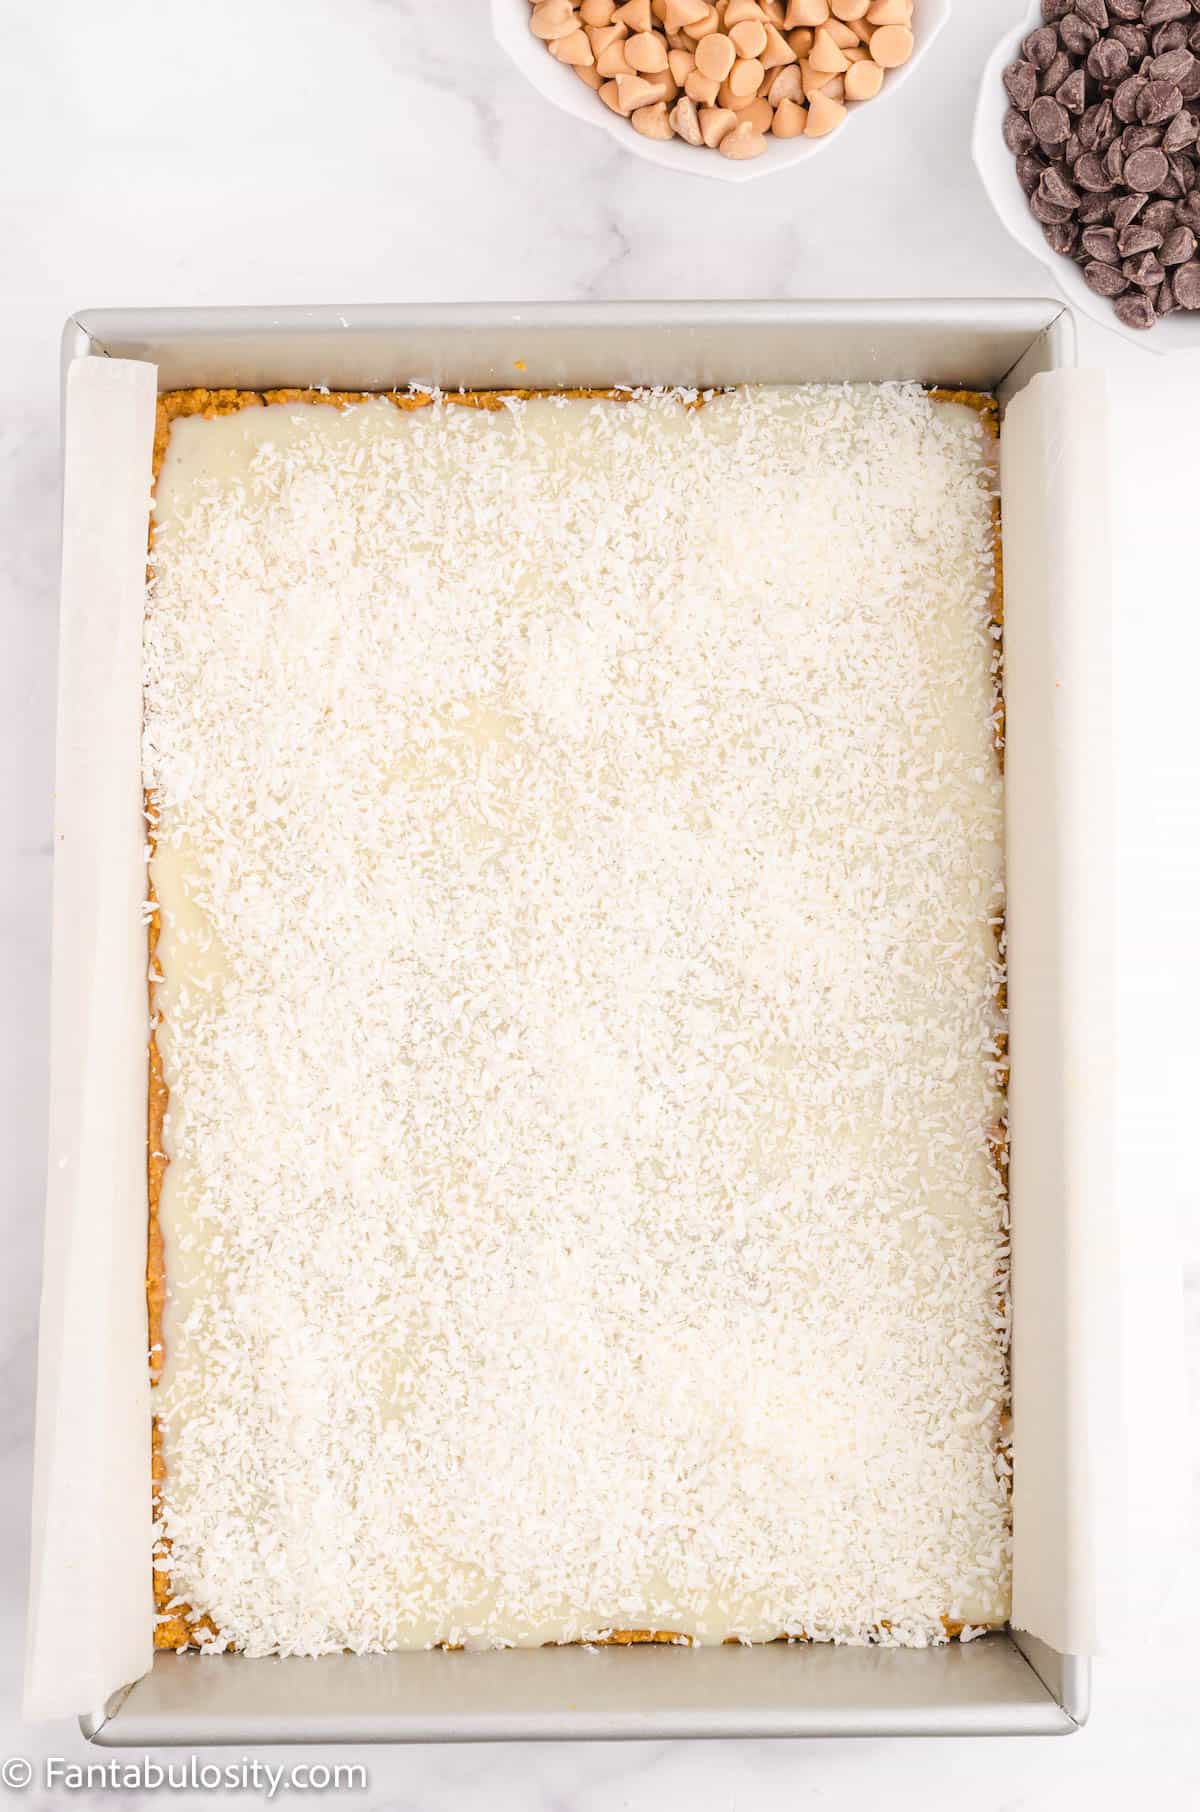 Sprinkled coconut flakes layer